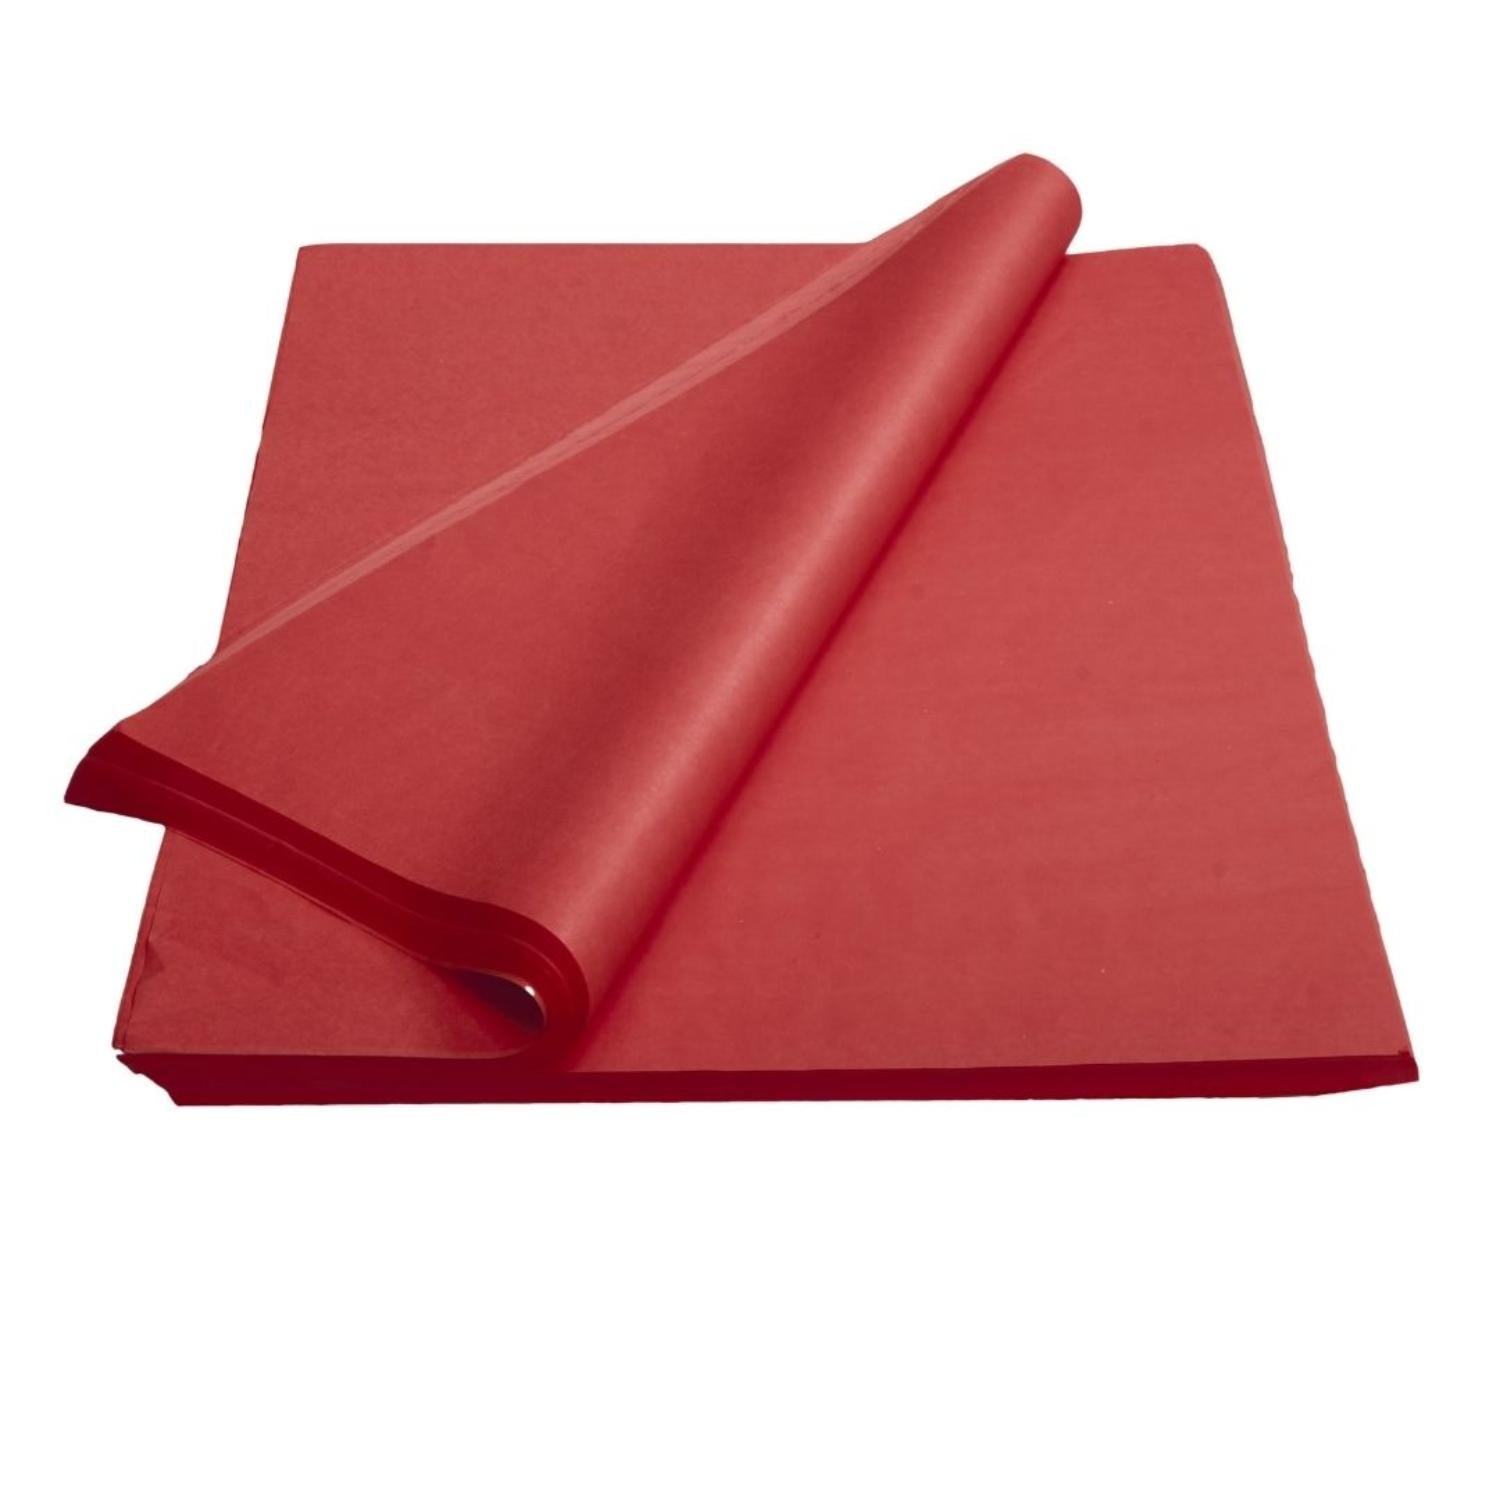 Bulk Red Tissue Paper | 15x20 inch | 480 Sheets